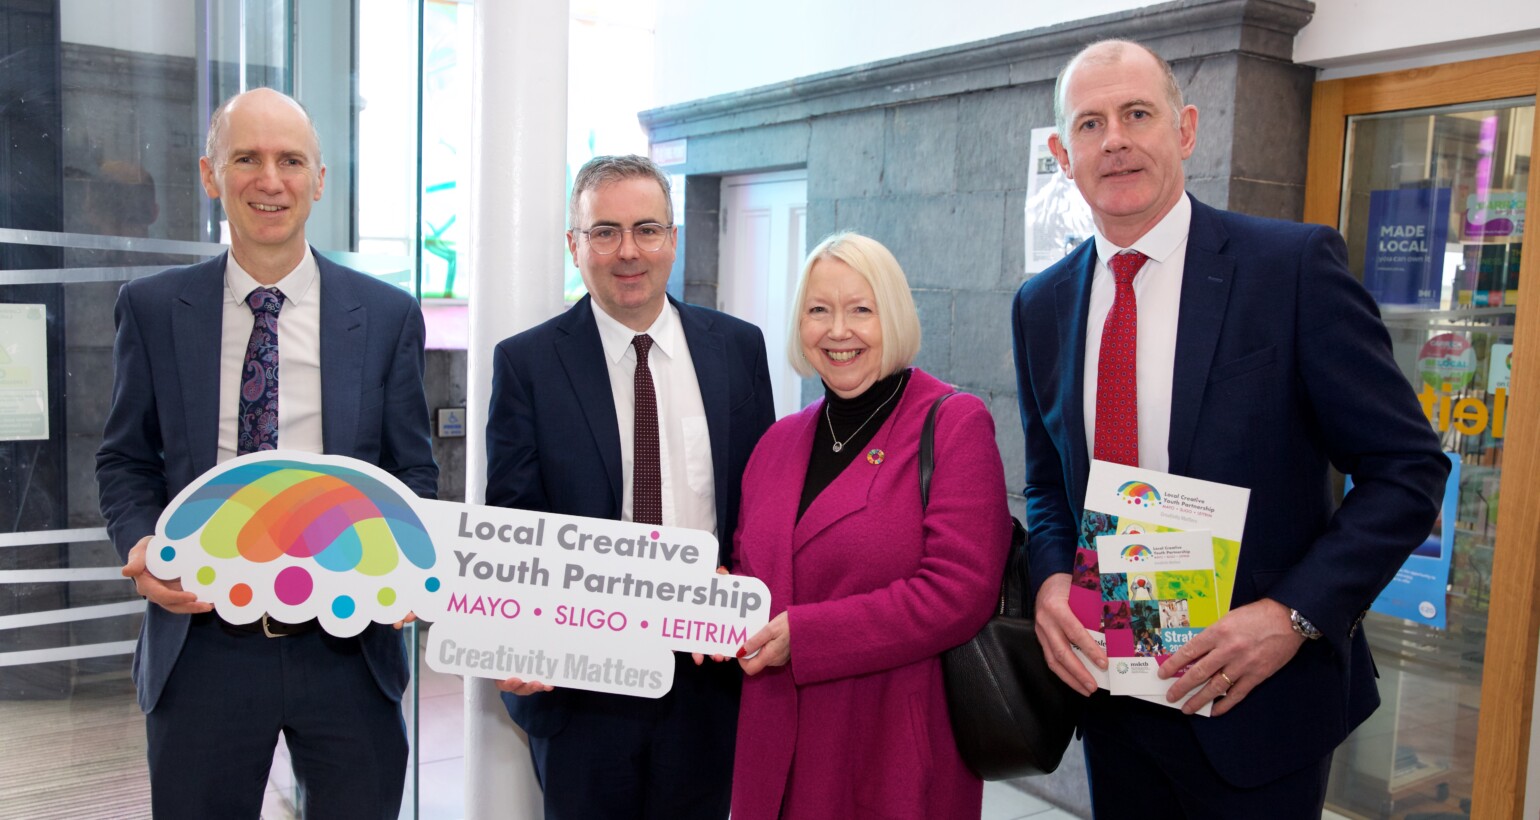 Launch of the Mayo, Sligo and Leitrim Local Creative Youth Partnership at The Dock Arts Centre, Carrick on Shannon